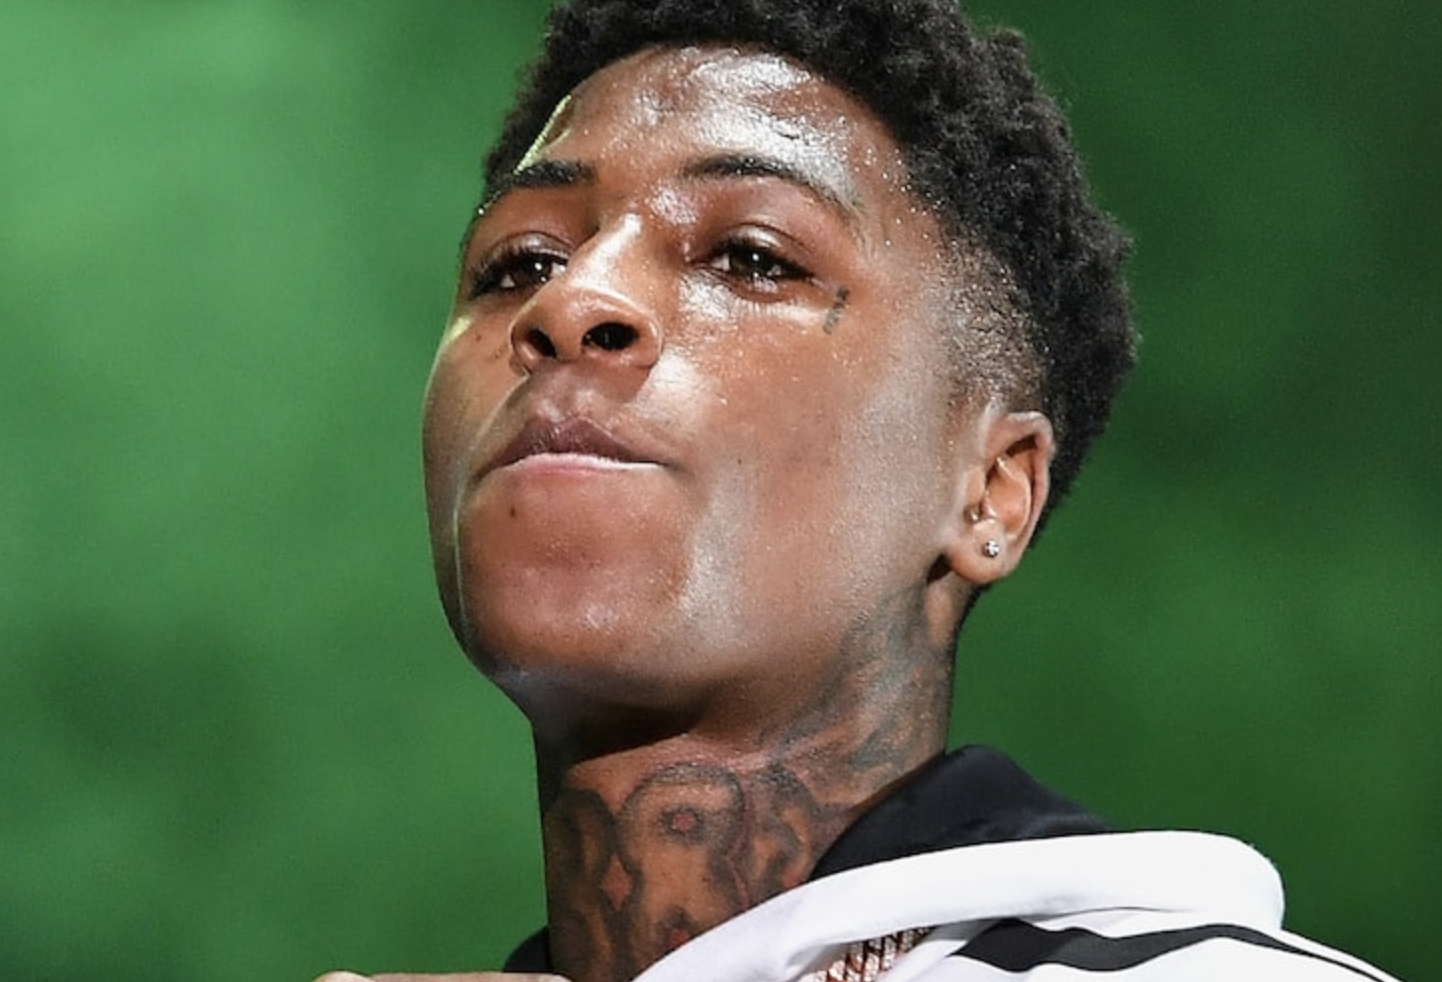 NBA_YoungBoy_Arrested_After_Running_From_The_Cops